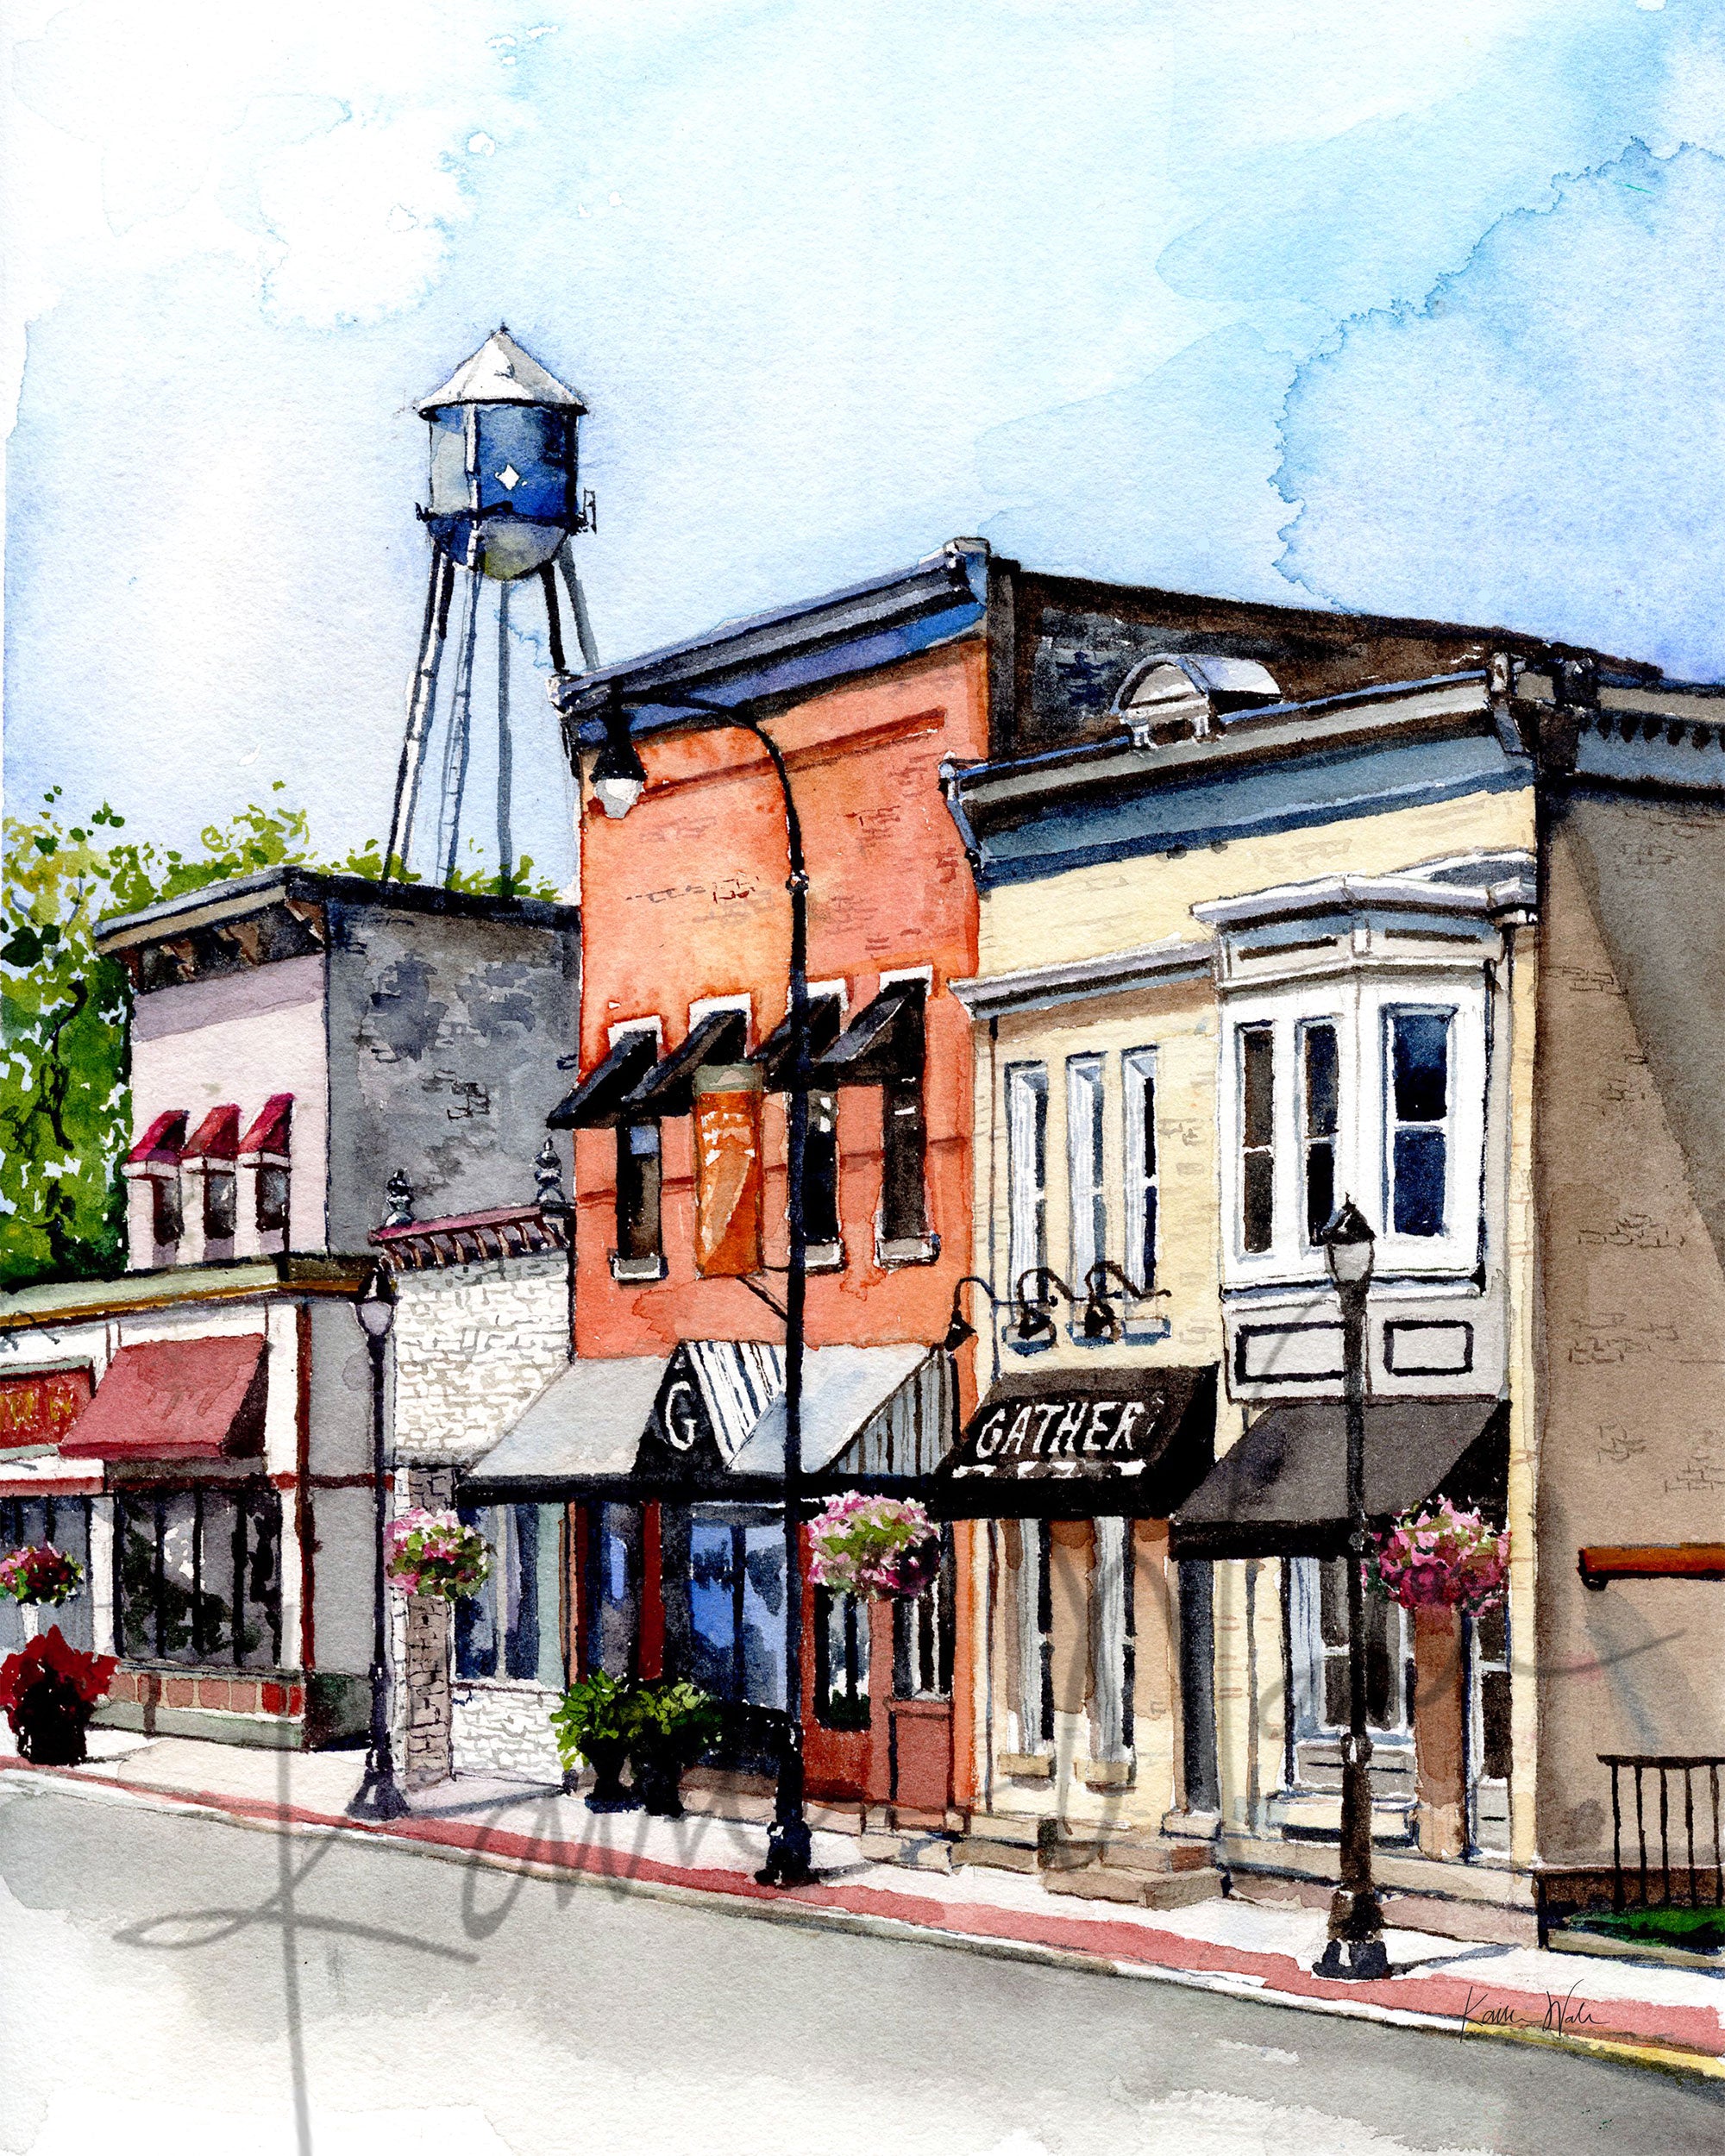 Unframed watercolor painting of buildings on Main Street in Waunakee, Wisconsin.